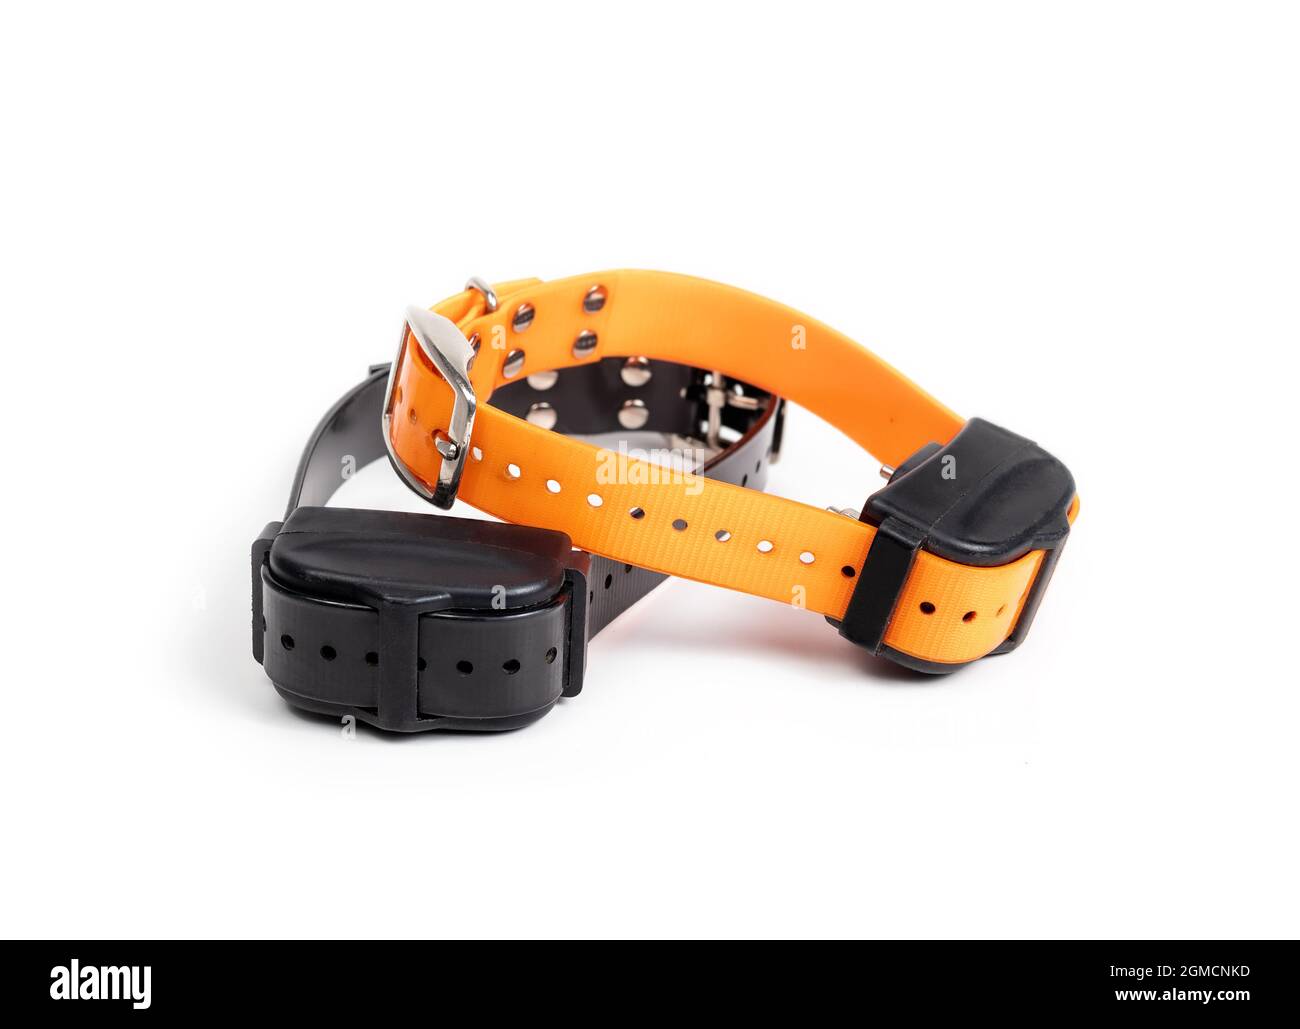 Dog shock or bark collar set. Large orange and black remote training collar for dogs. Device used for obedience training, recall or to reduce or stop Stock Photo